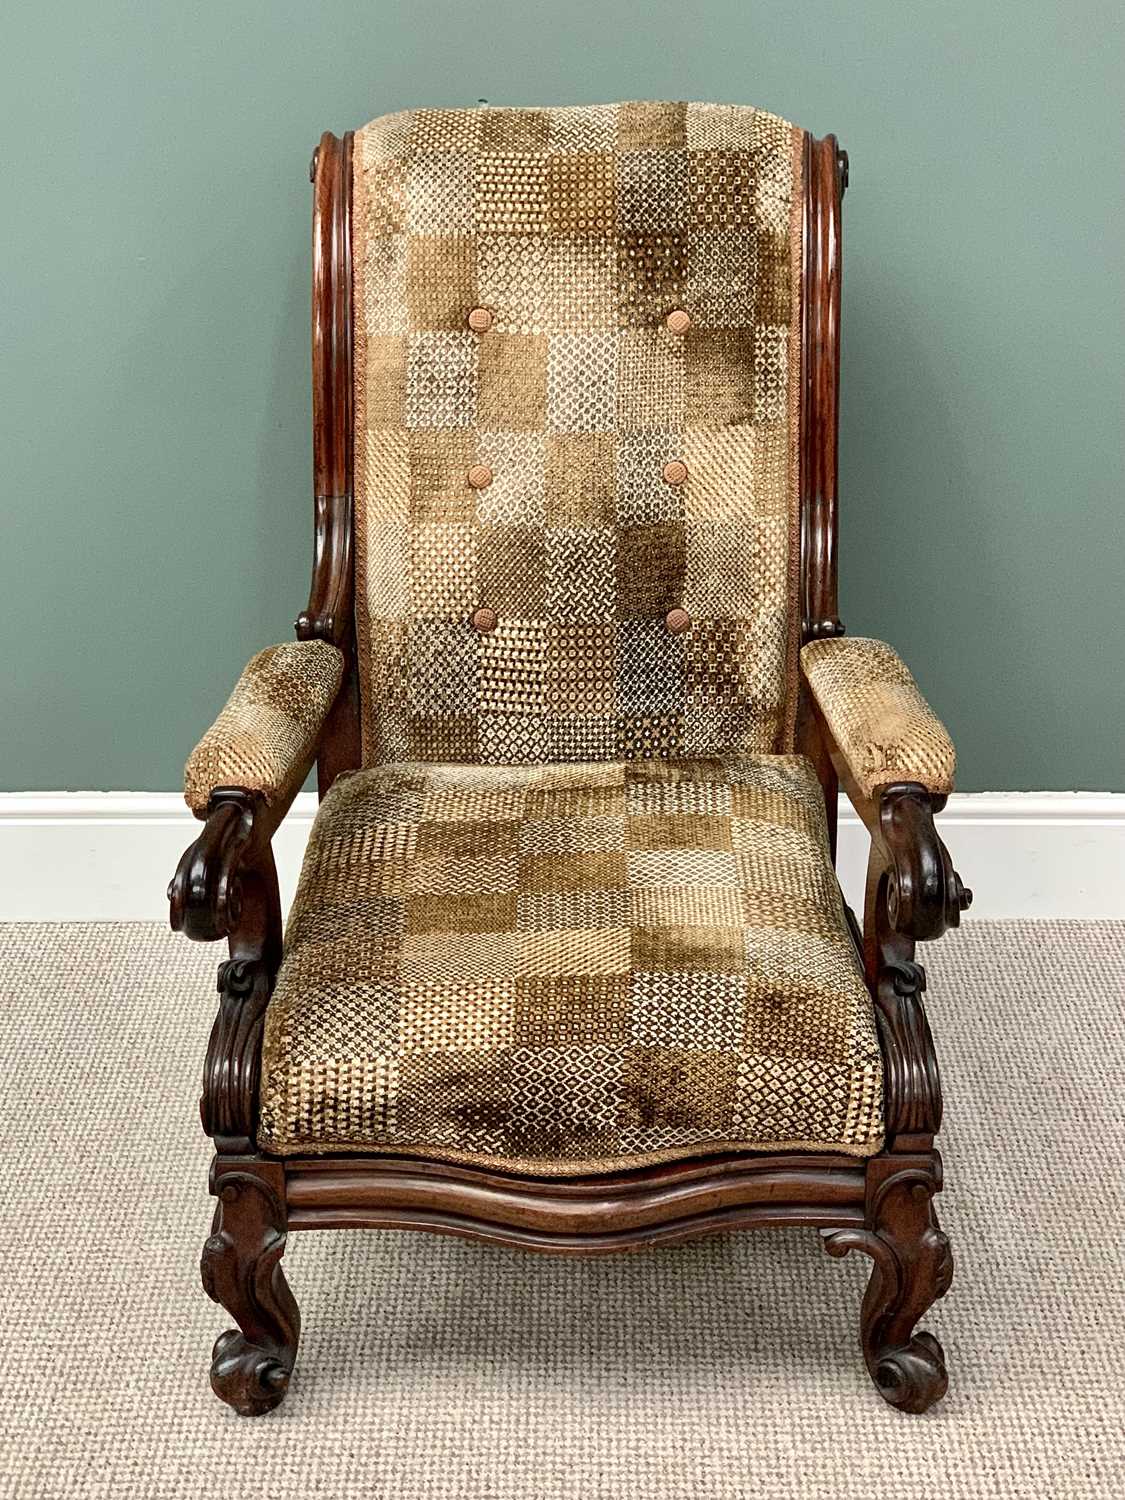 VICTORIAN MAHOGANY FRAMED GENTLEMAN'S ARMCHAIR - with scrolled back and arms, chequered button